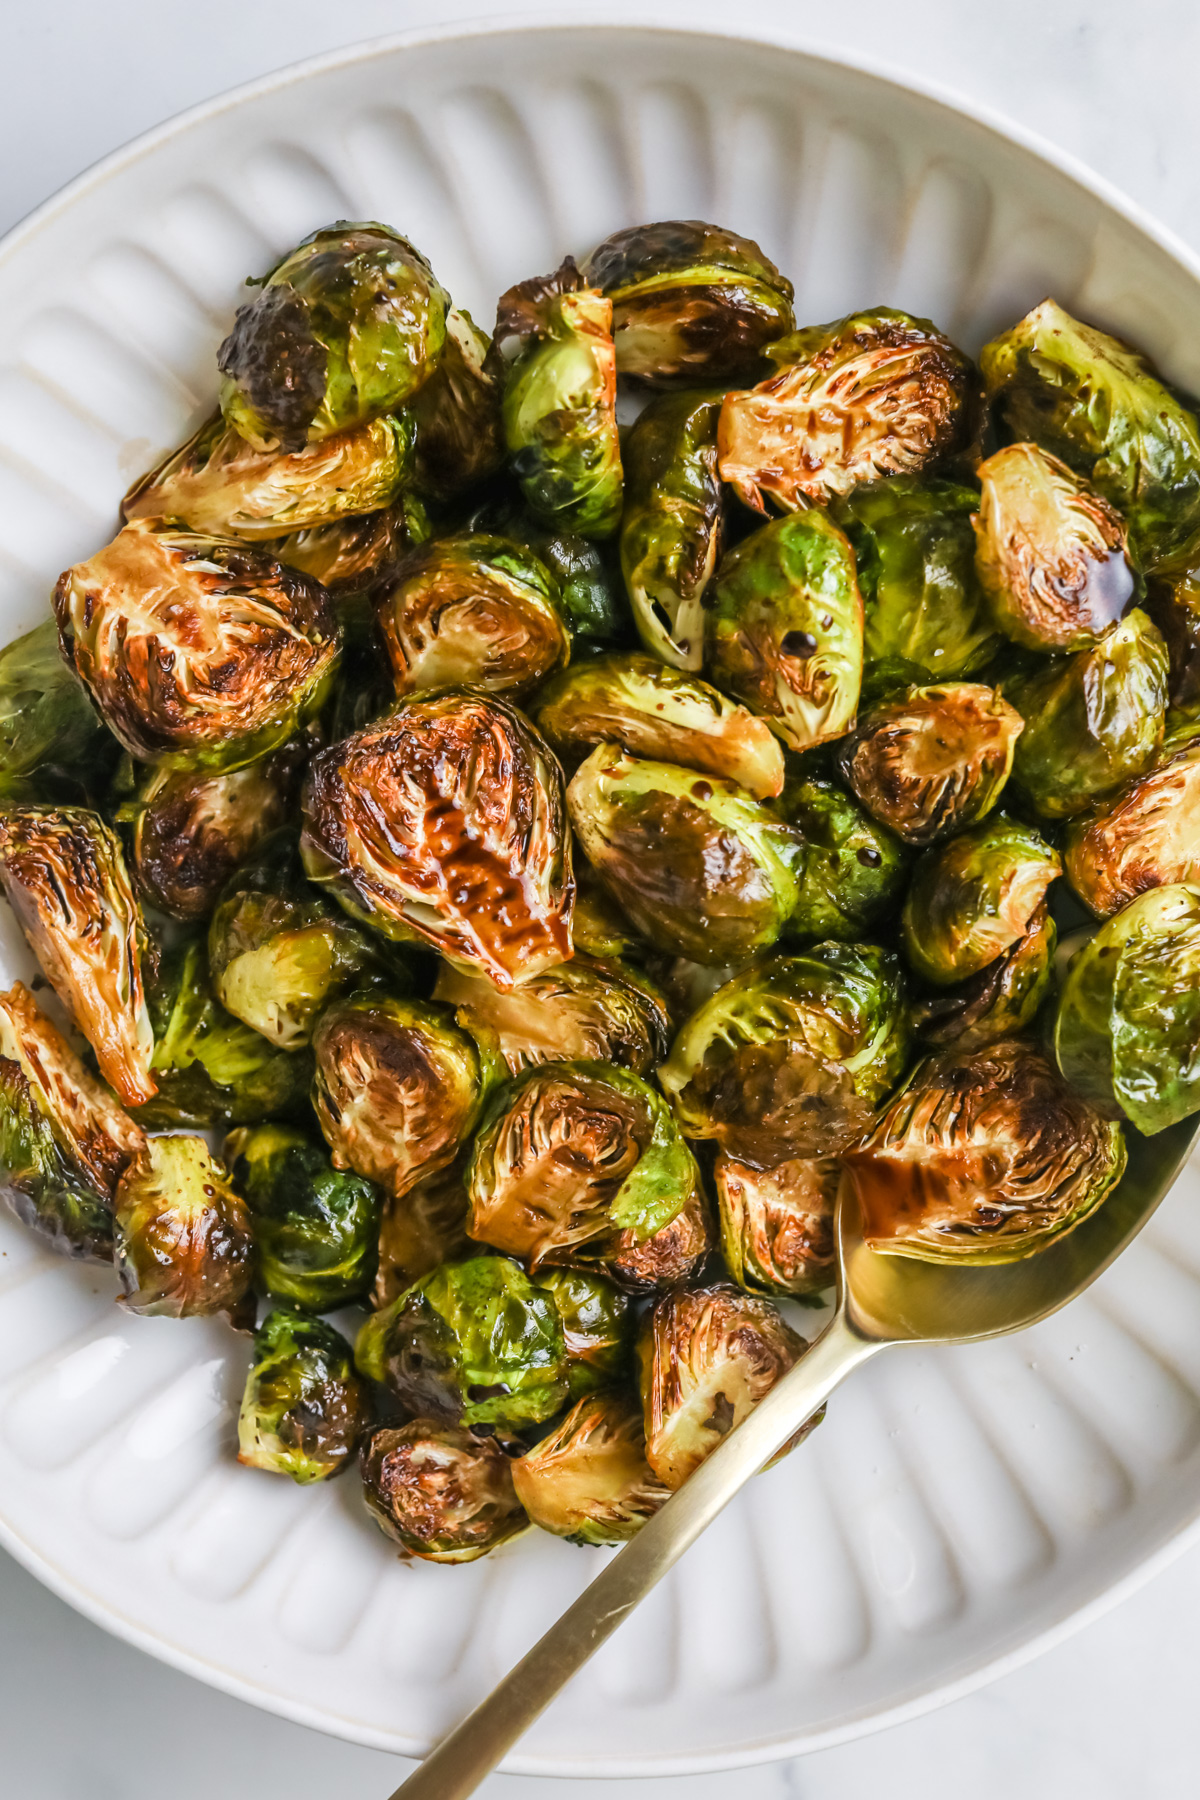 Balsamic brussels sprouts in bowl.